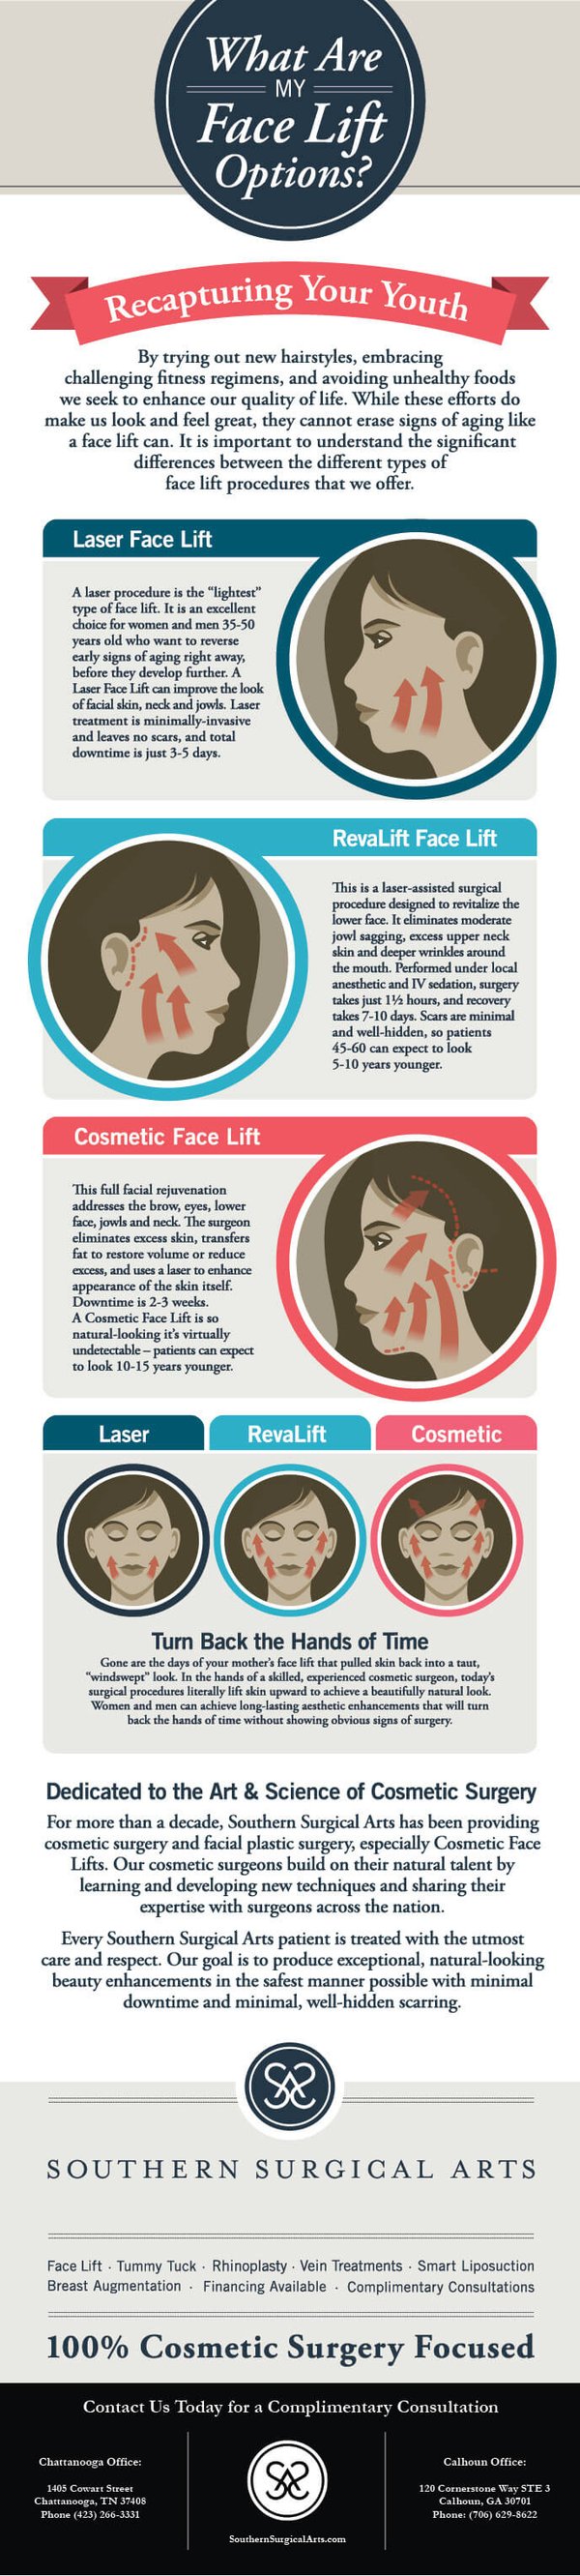 19_SSA-What-Are-My-Face-Lift-Options-Infographic2_UPDATE-01